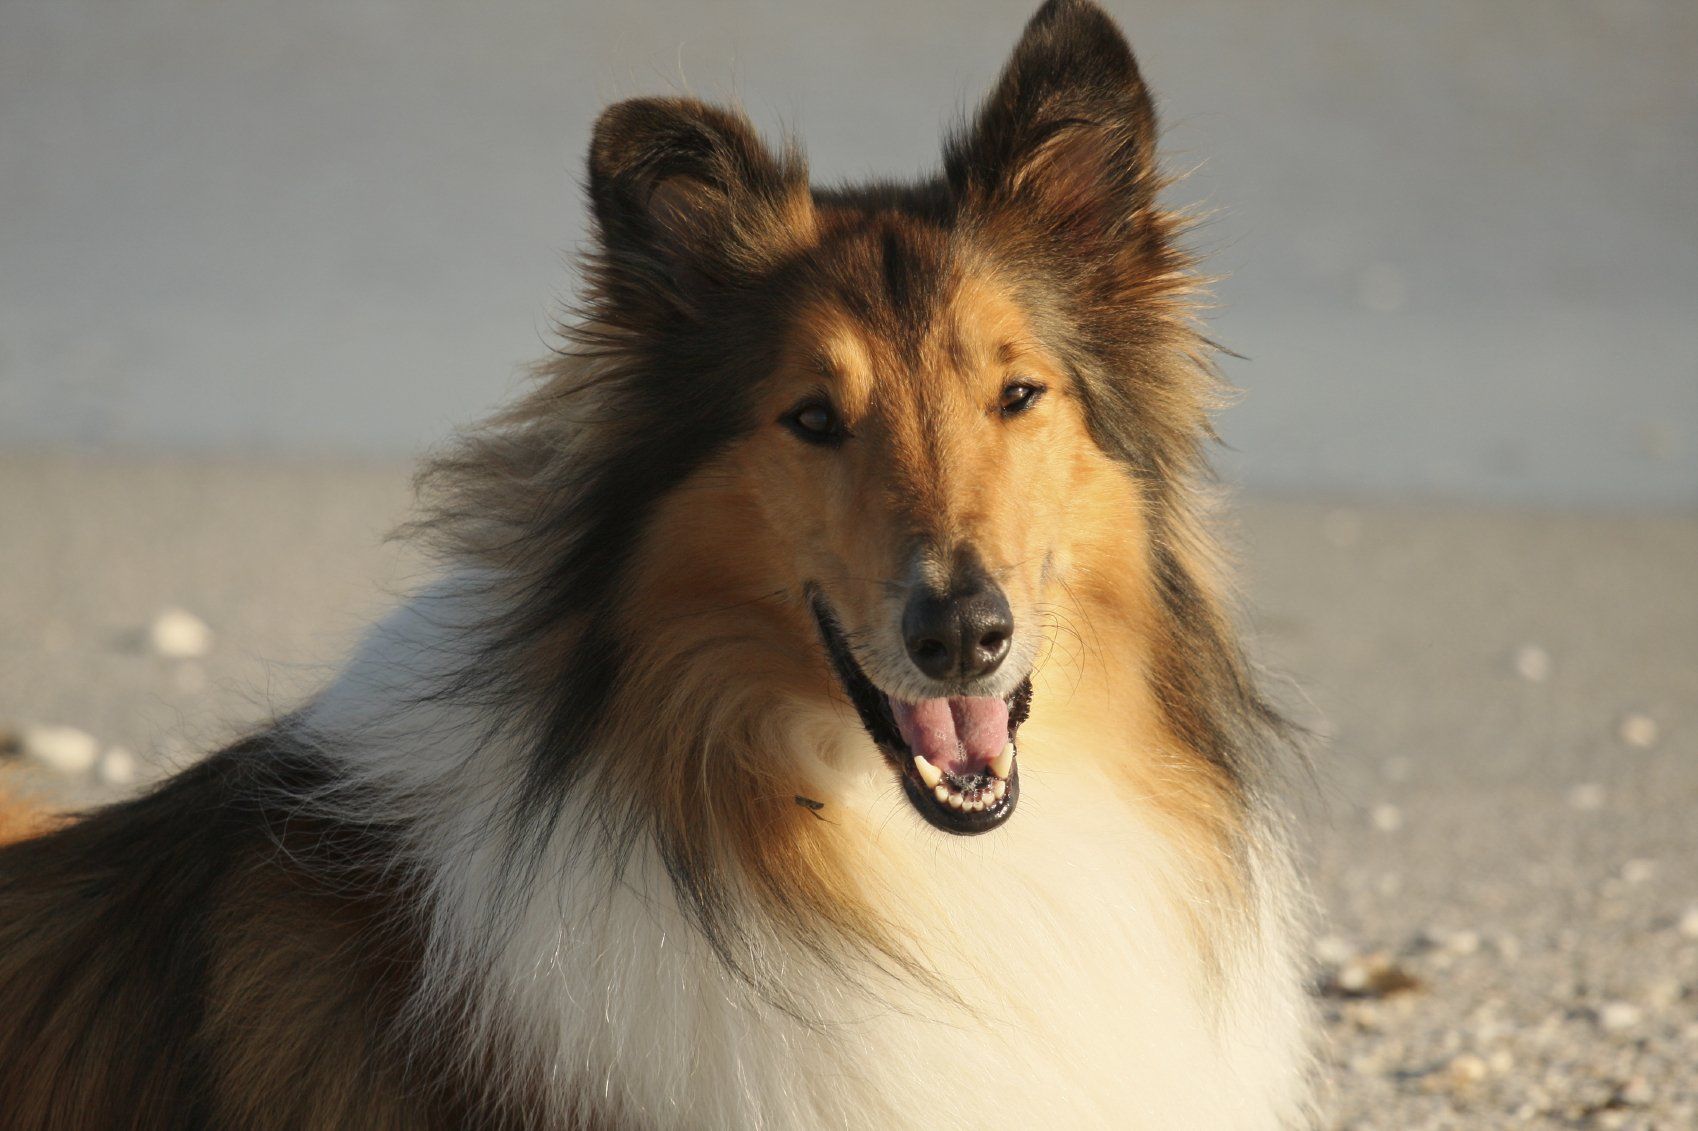 Collie (Rough) Dog Breed Information